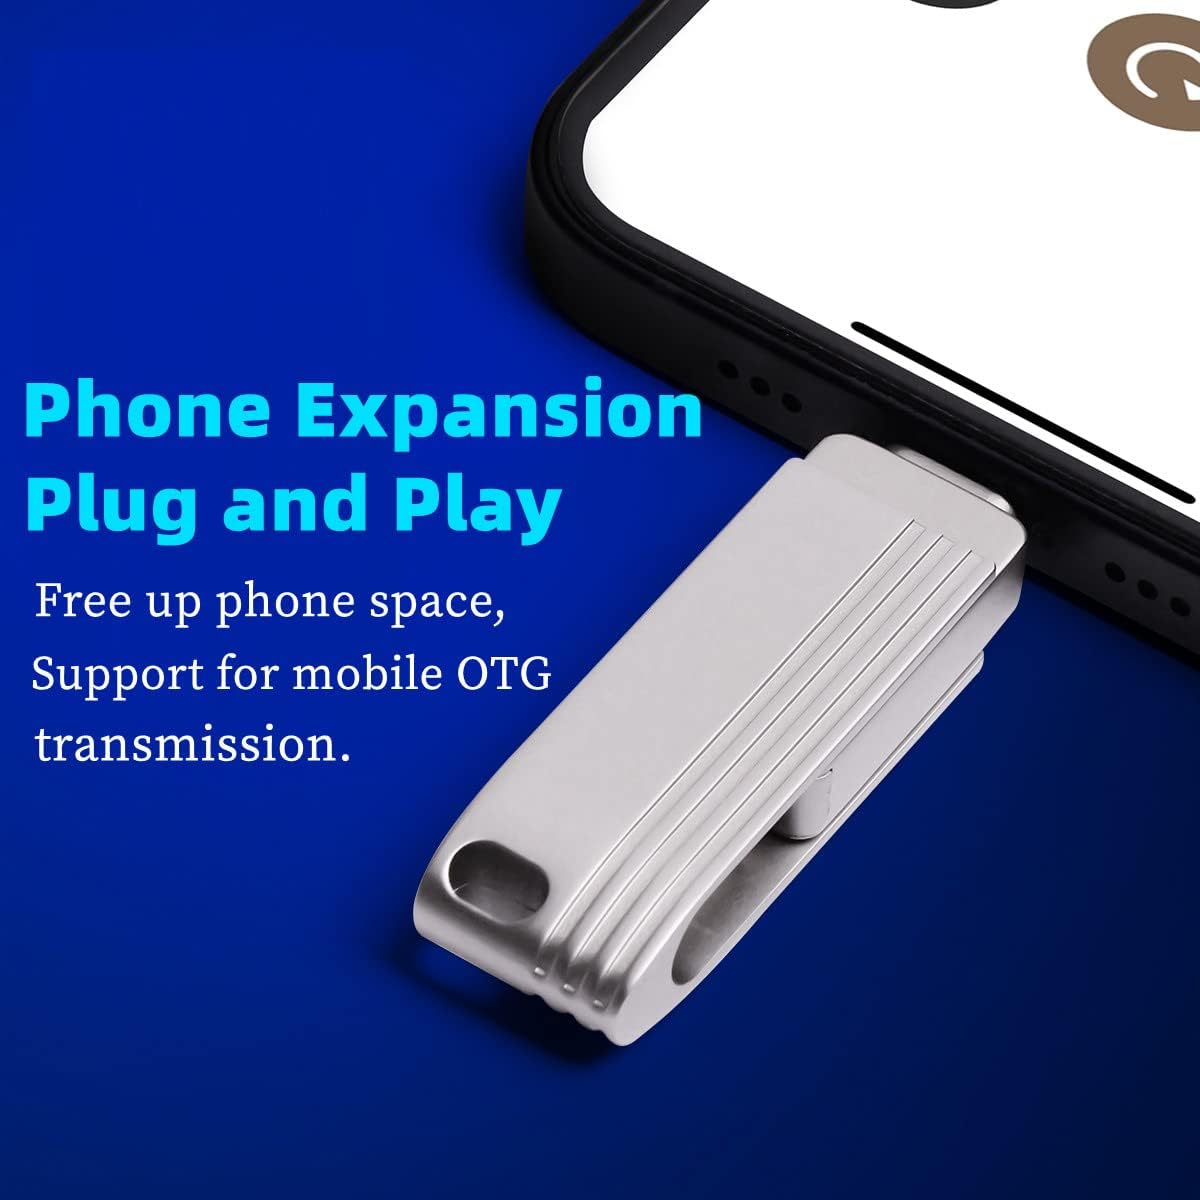 128GB Dual USB3.0 Flash Drive for iOS,3 in 1 Ultra USB C Memory Stick Drive,High-Speed Transfer Thumb Drive,USB C External Date Storage Drive,USB Zip Drive for MacBook/Android Phones/iPad/Laptop/PC